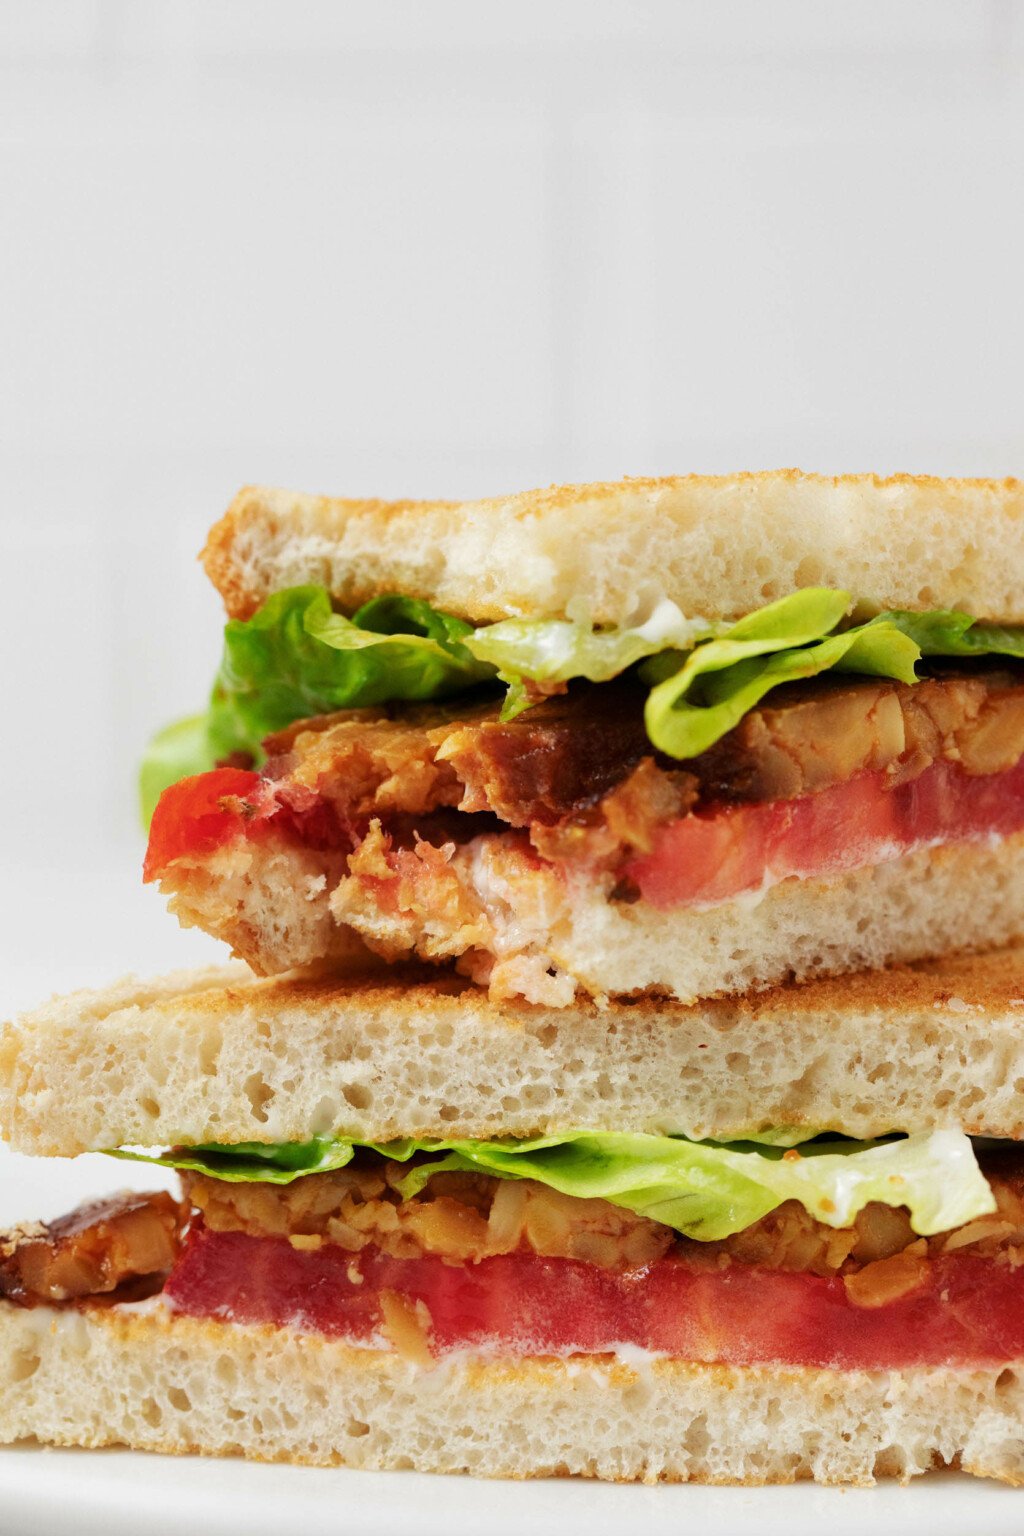 A close up image of a vegan BLT sandwich, prepared with tempeh bacon.